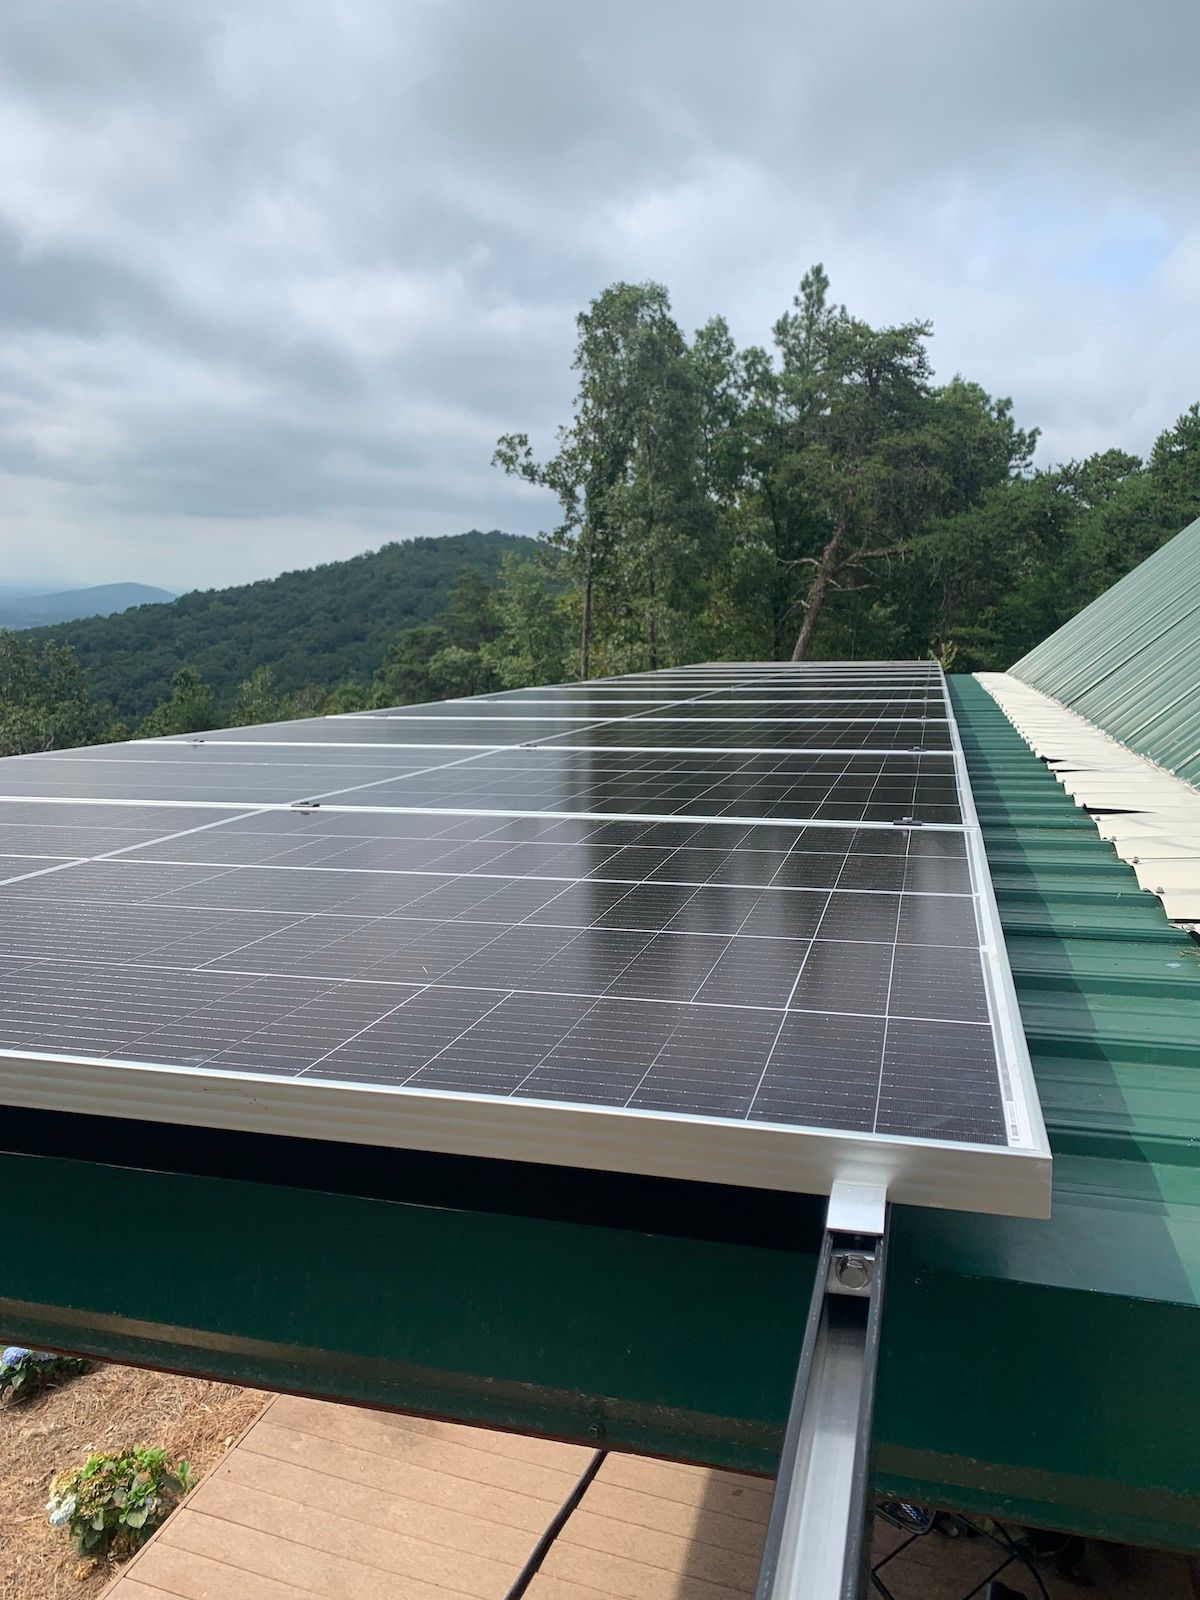 GenSpring Power's Off-Grid Energy Solution Is Perfect for Georgia Homeowners Living  Out in the Country